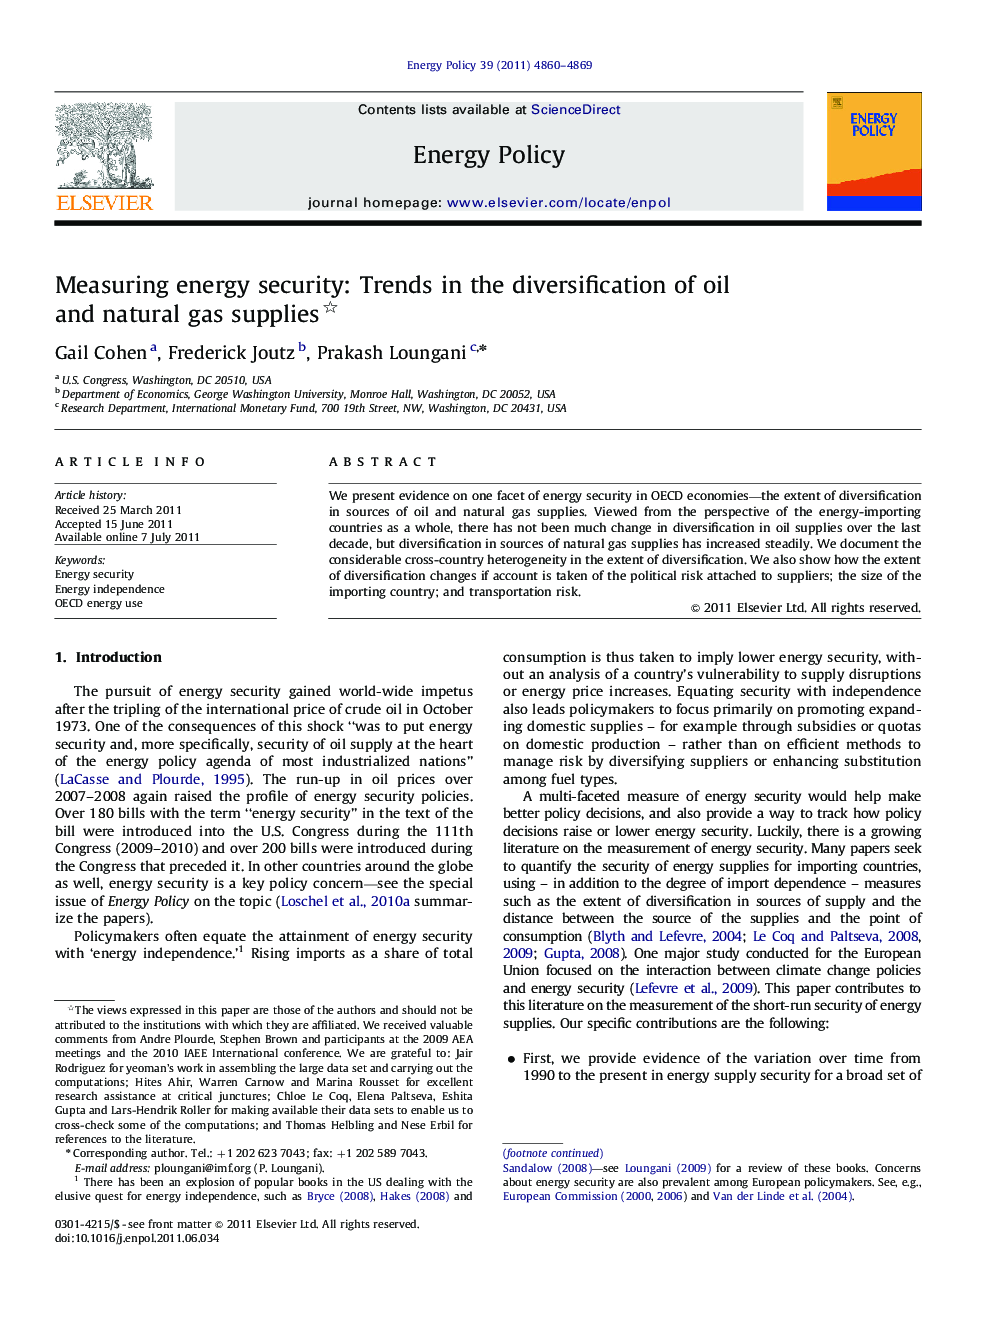 Measuring energy security: Trends in the diversification of oil and natural gas supplies